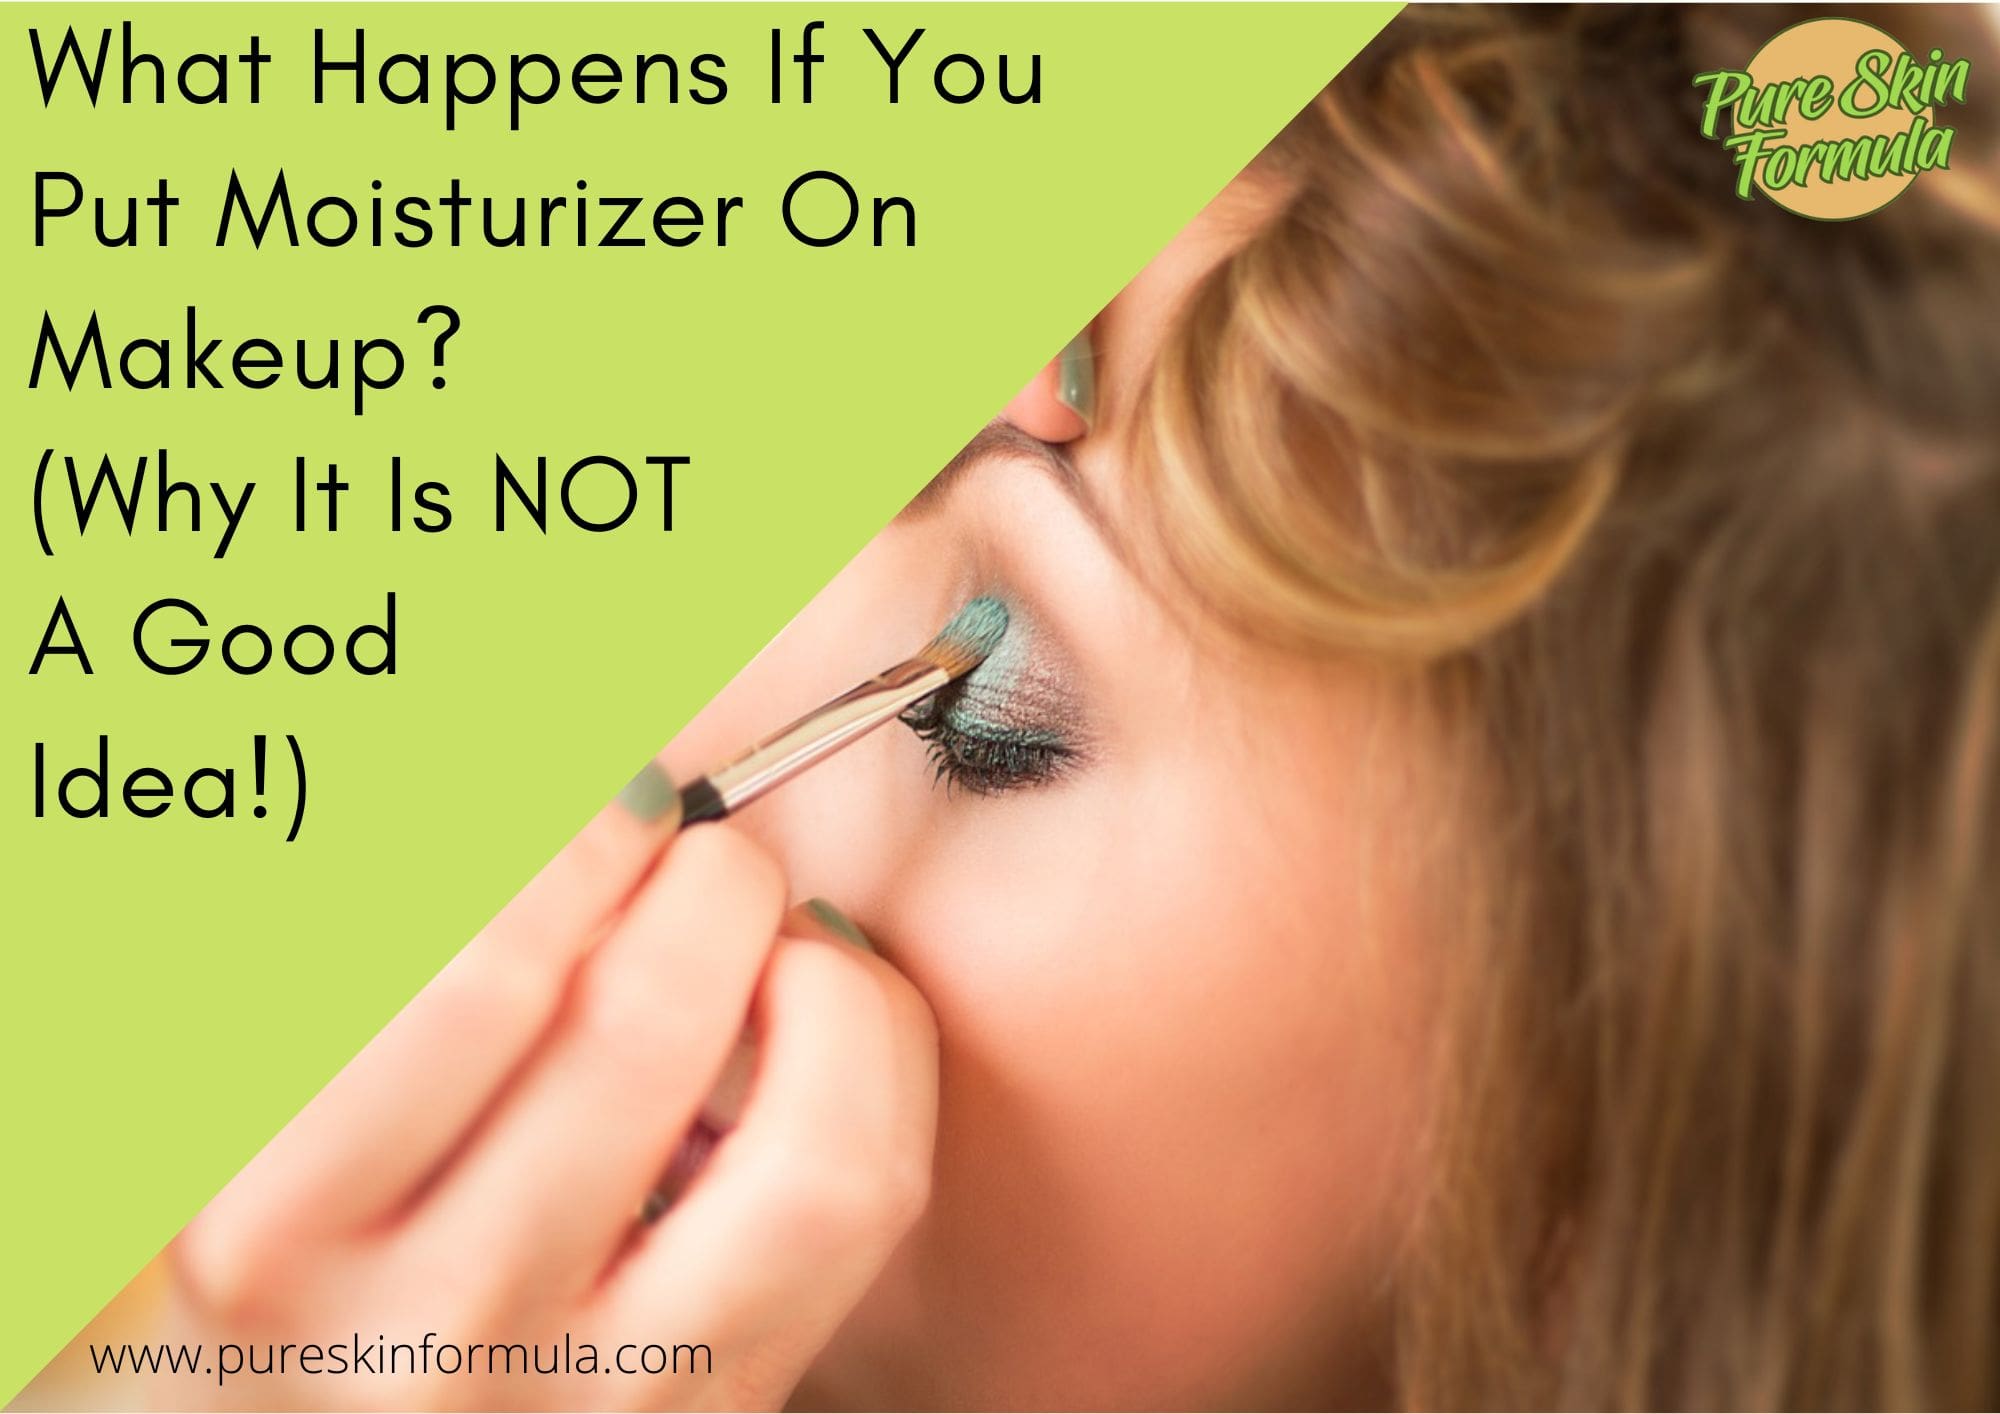 What Happens If You Put Moisturizer On Makeup_featured image